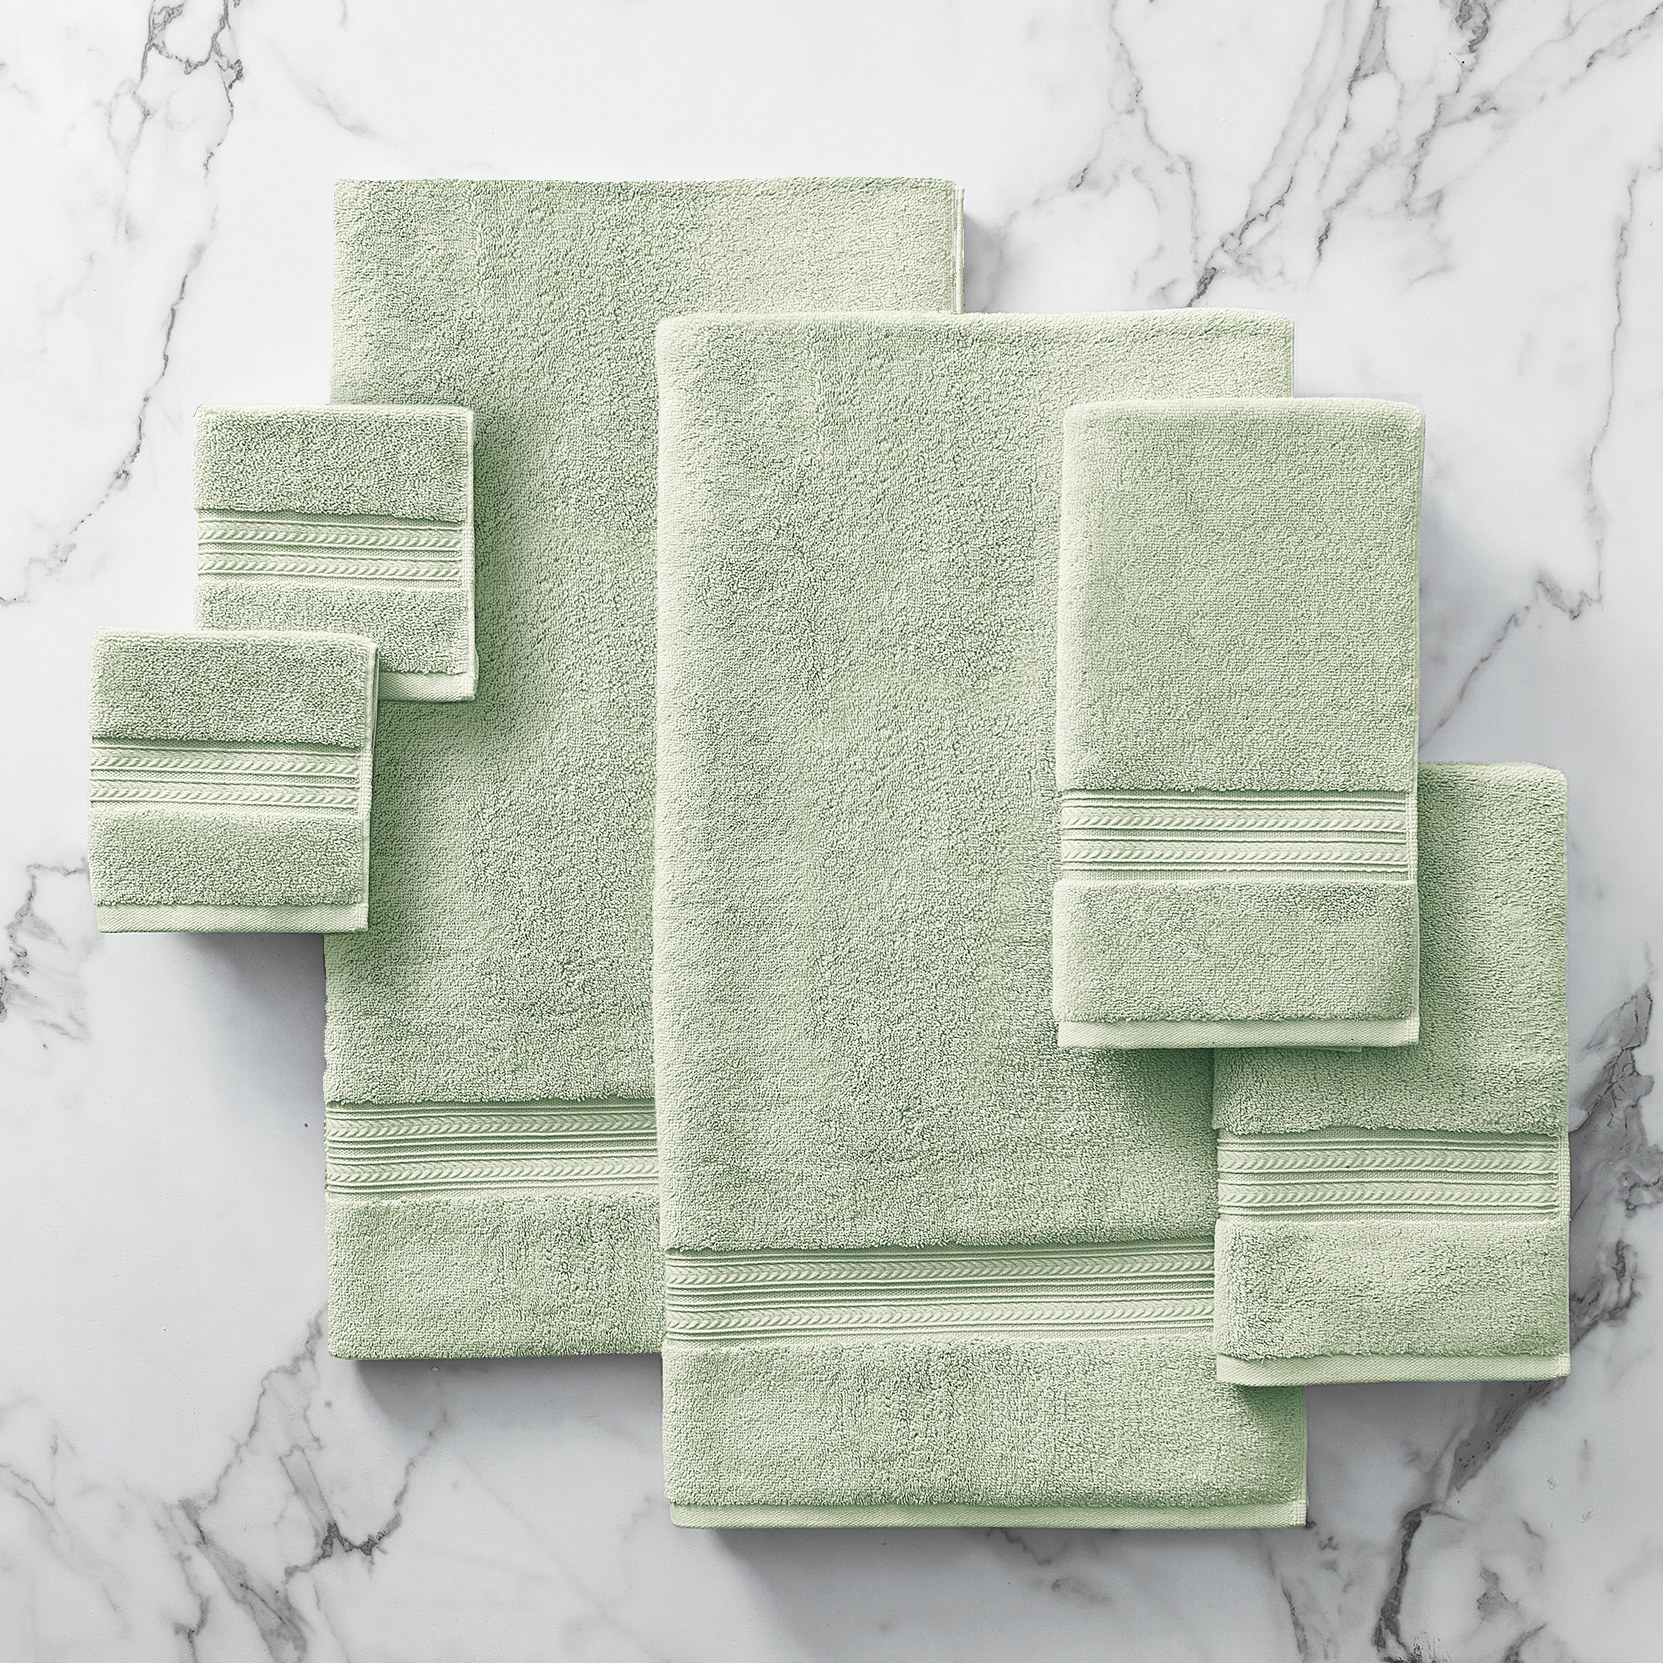 The bath towel featured beside several other towels of differing sizes